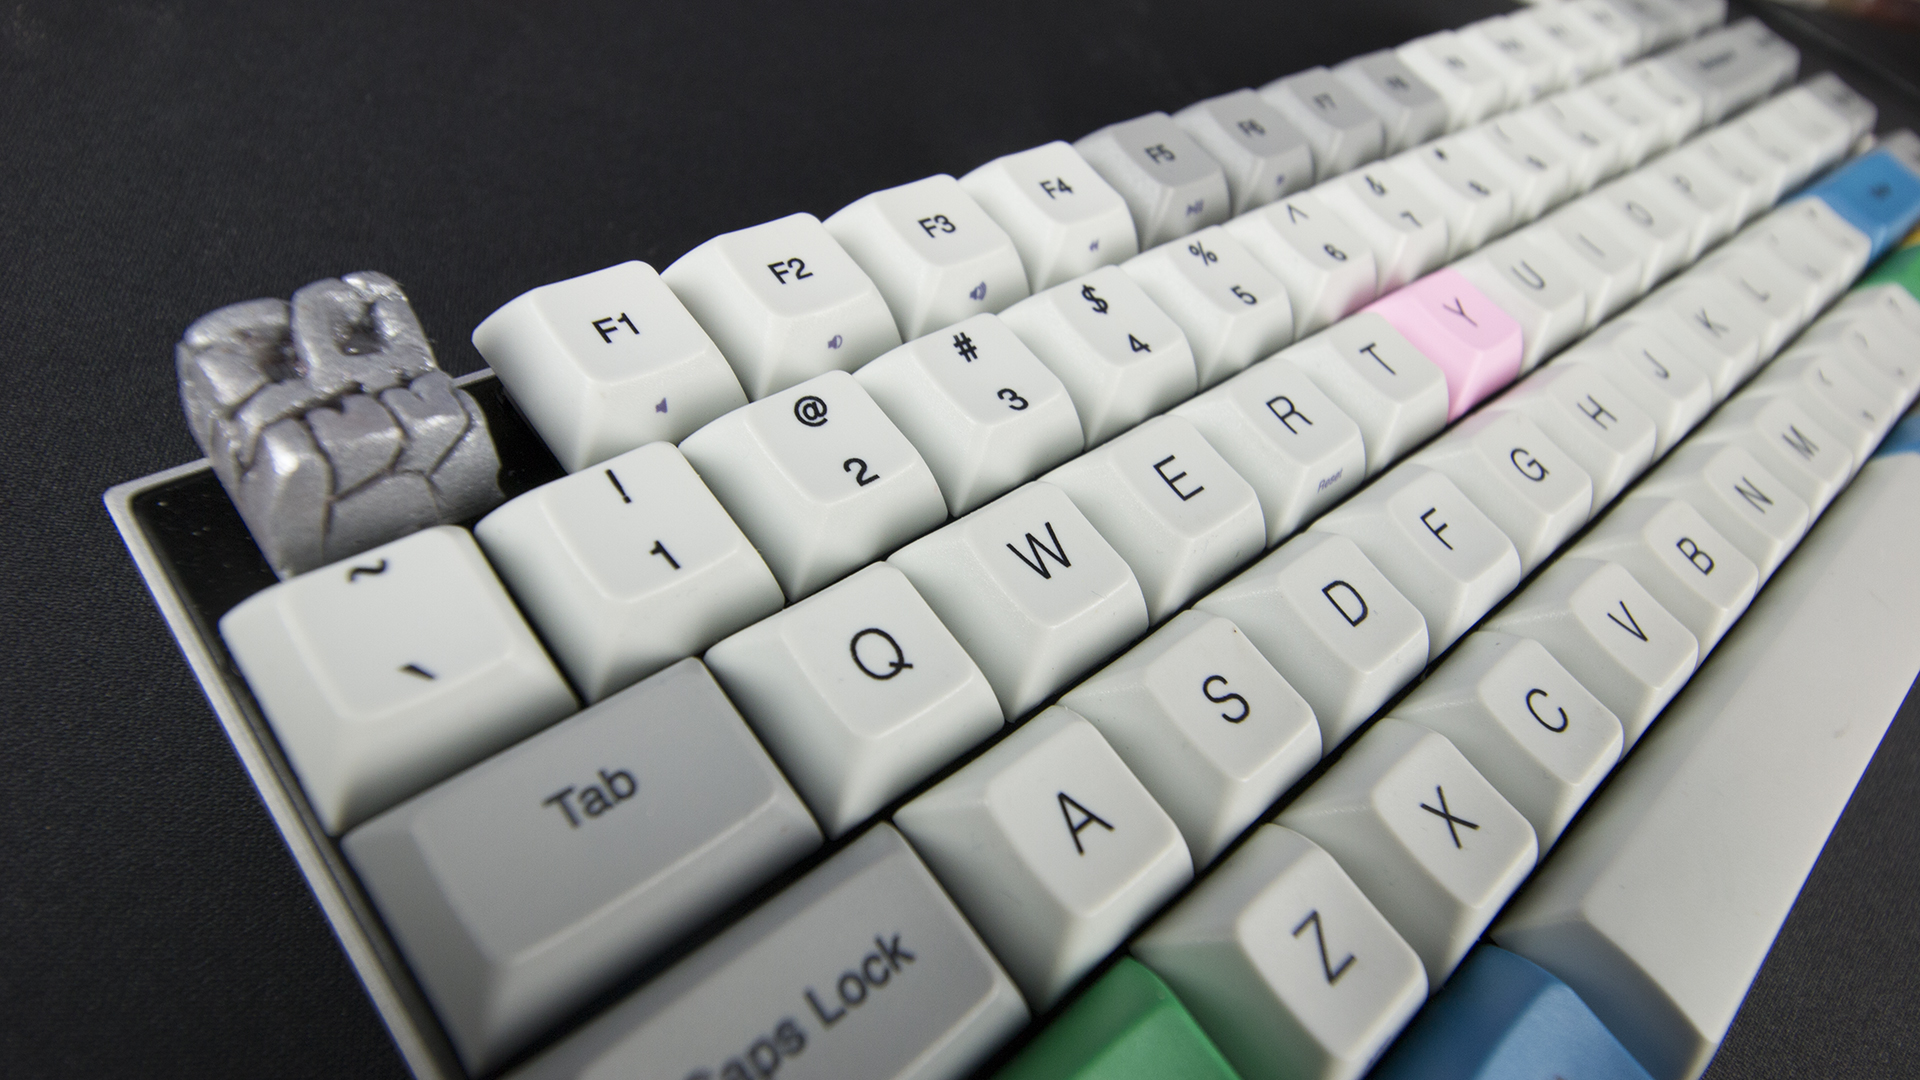 Vortex Race 3 Keyboard Review: The 75 Per Cent Solution